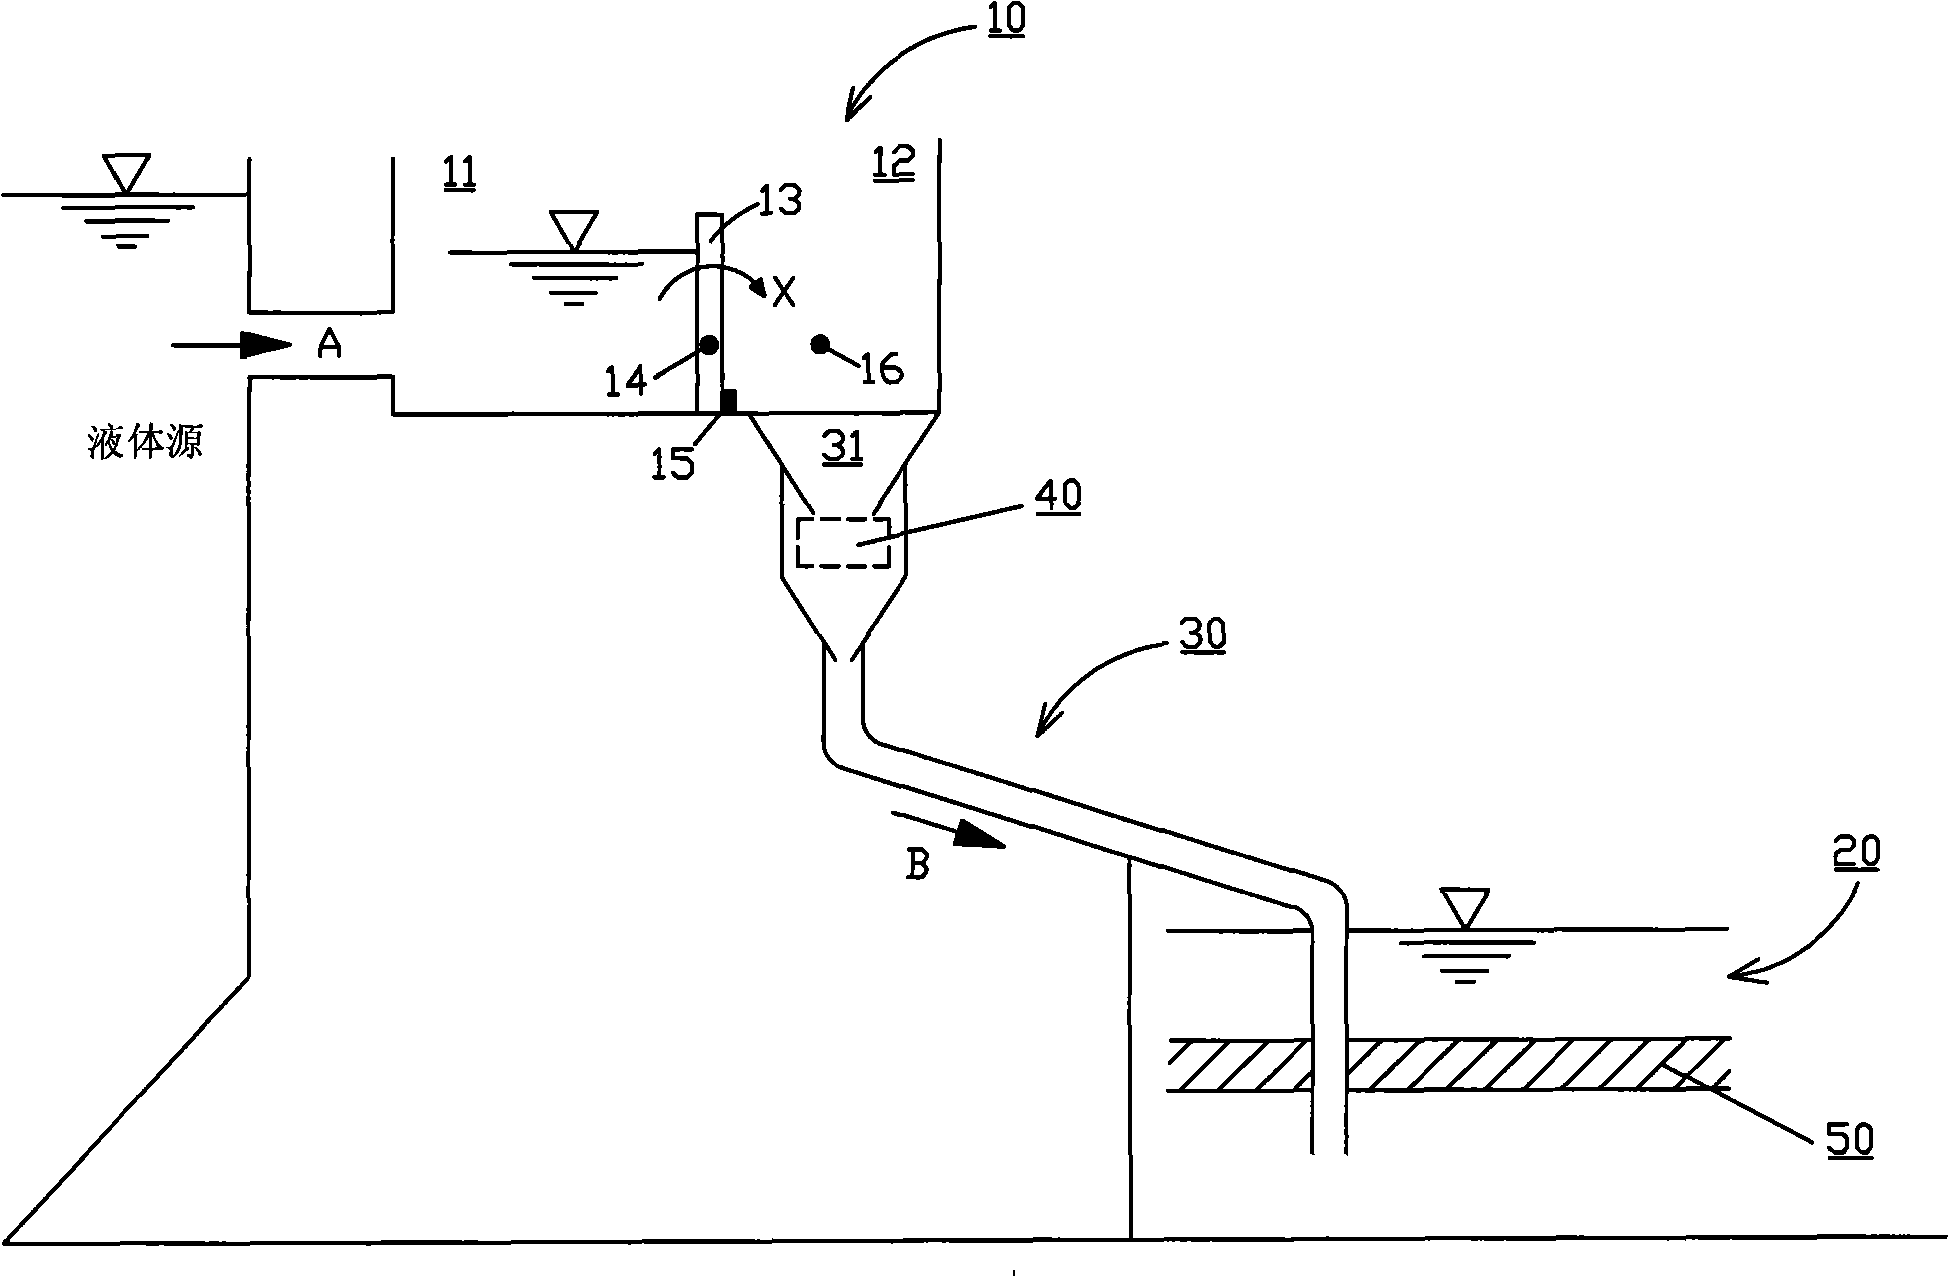 Liquid gas injection system